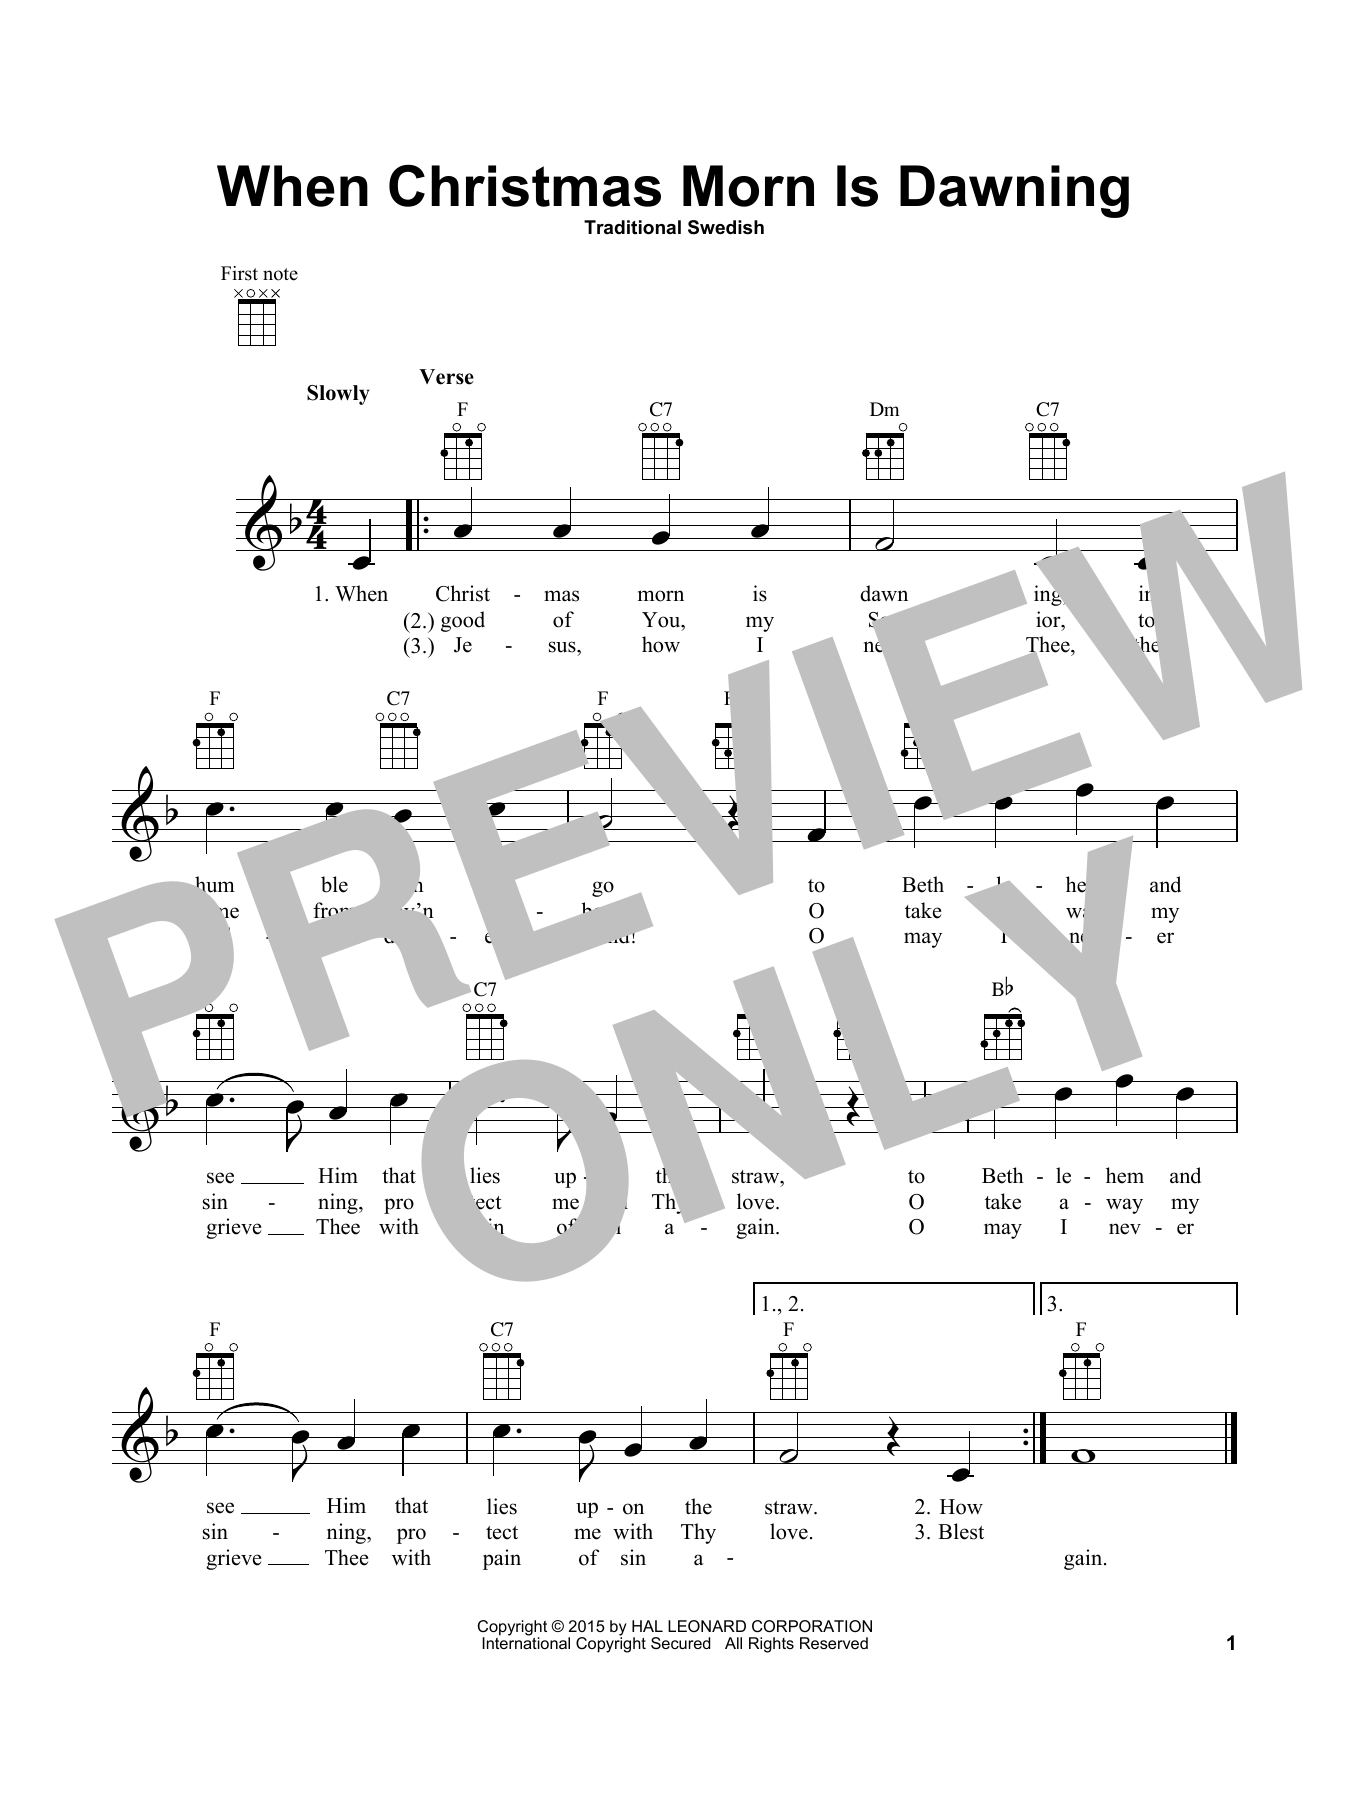 Download Traditional Swedish When Christmas Morn Is Dawning Sheet Music